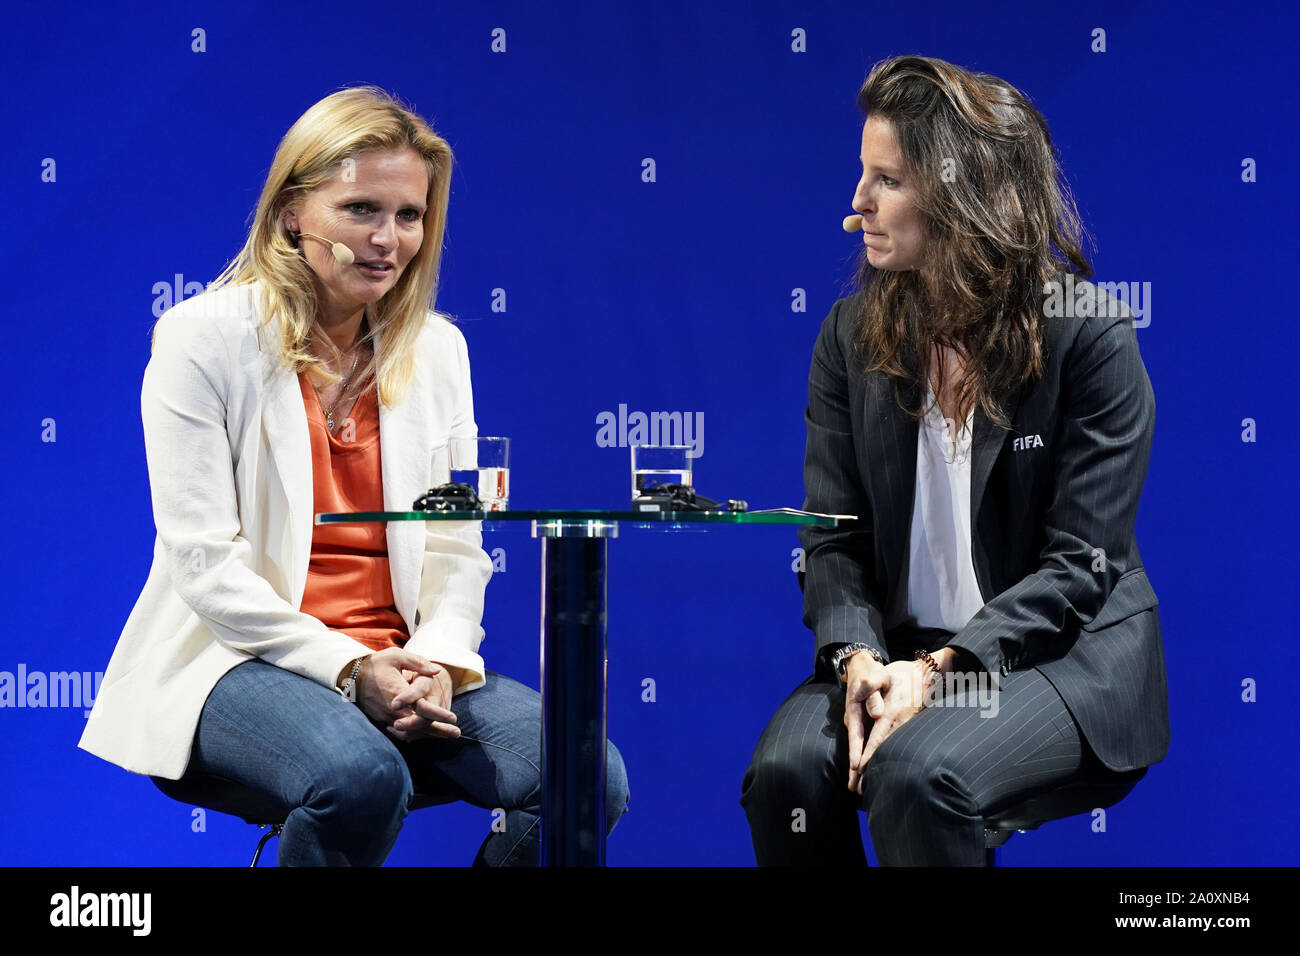 Milan, Italy. 22nd Sep, 2019.  Sarina Wiegman - Head Coach of the Netherlands Women's National Team - speaking with Patricia Gonazales (FIFA) during the FIFA Football Conference at Palazzo Del Ghiaccio, on September 22, 2019 in Milan, Italy. Credit: Sport Press Photo/Alamy Live News Stock Photo